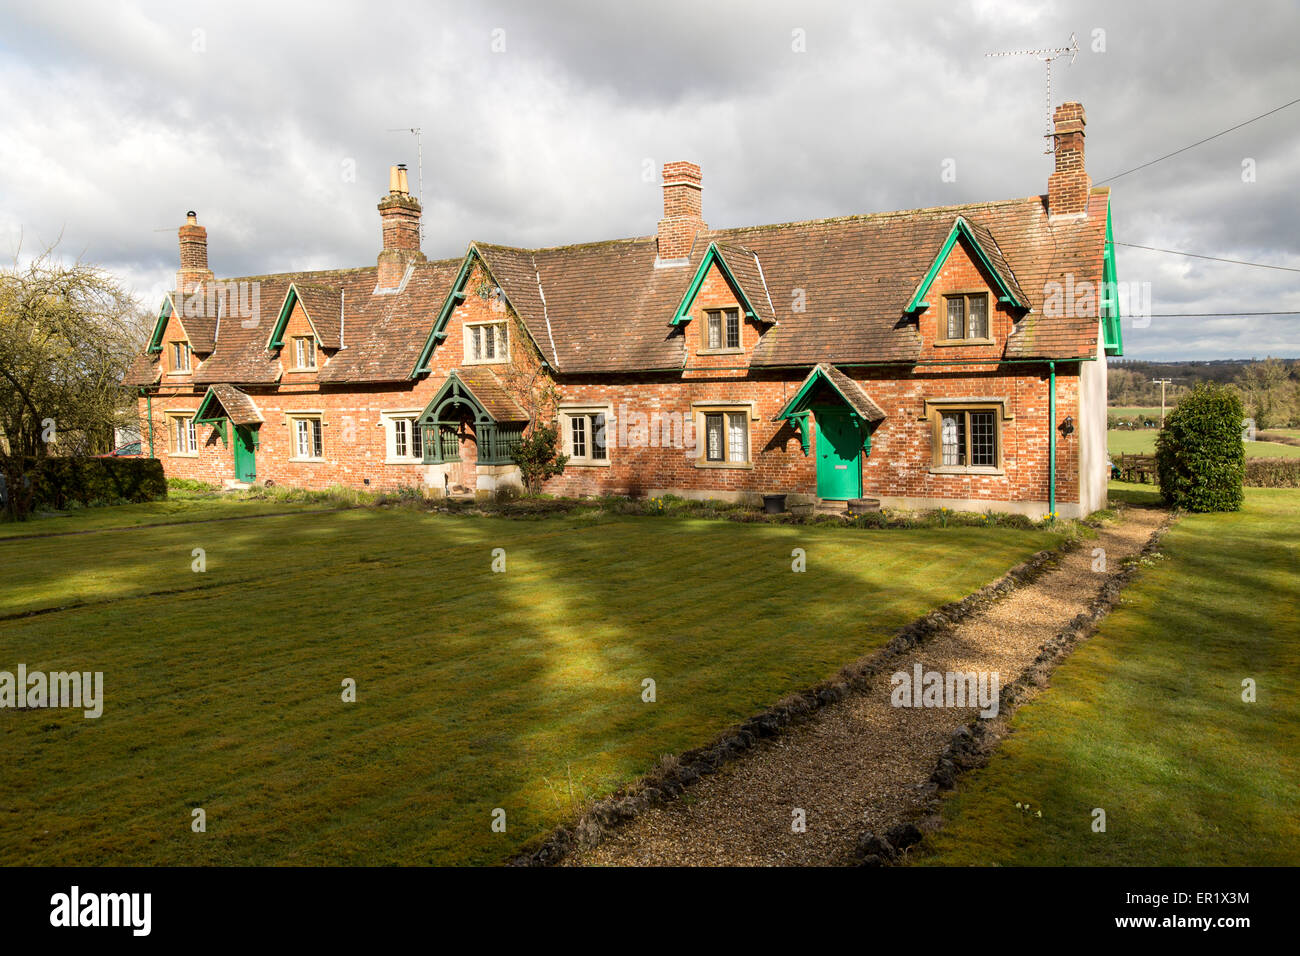 Traditional rural cottages in small terrace, Compton Bassett, Wiltshire, England, UK Stock Photo